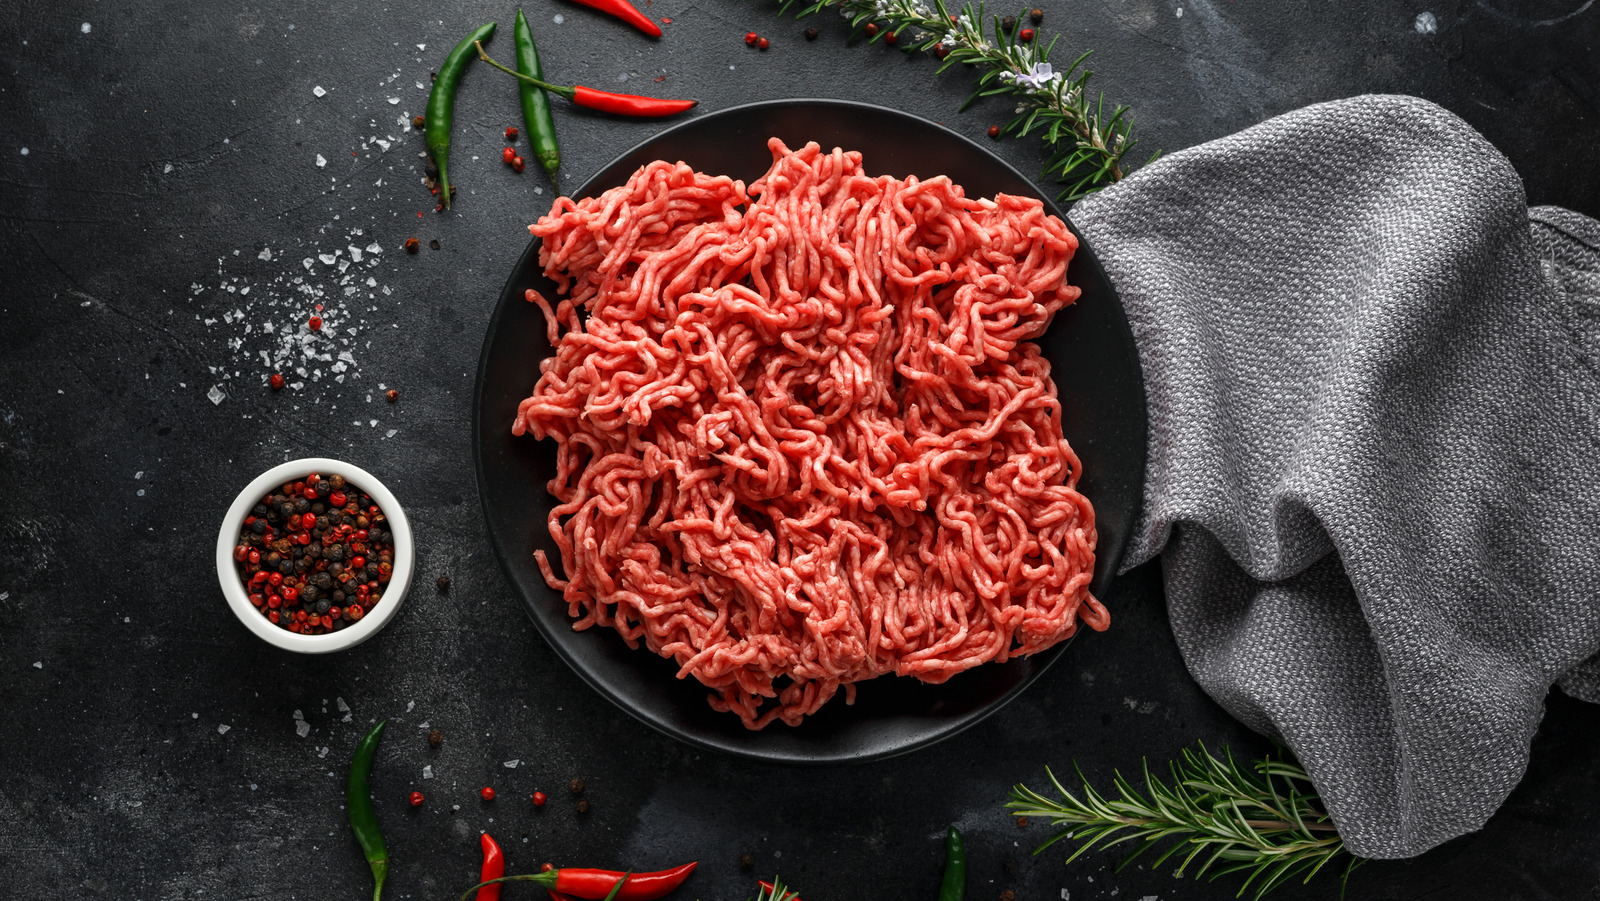 Is Ground Beef Bad For You? - Health Digest